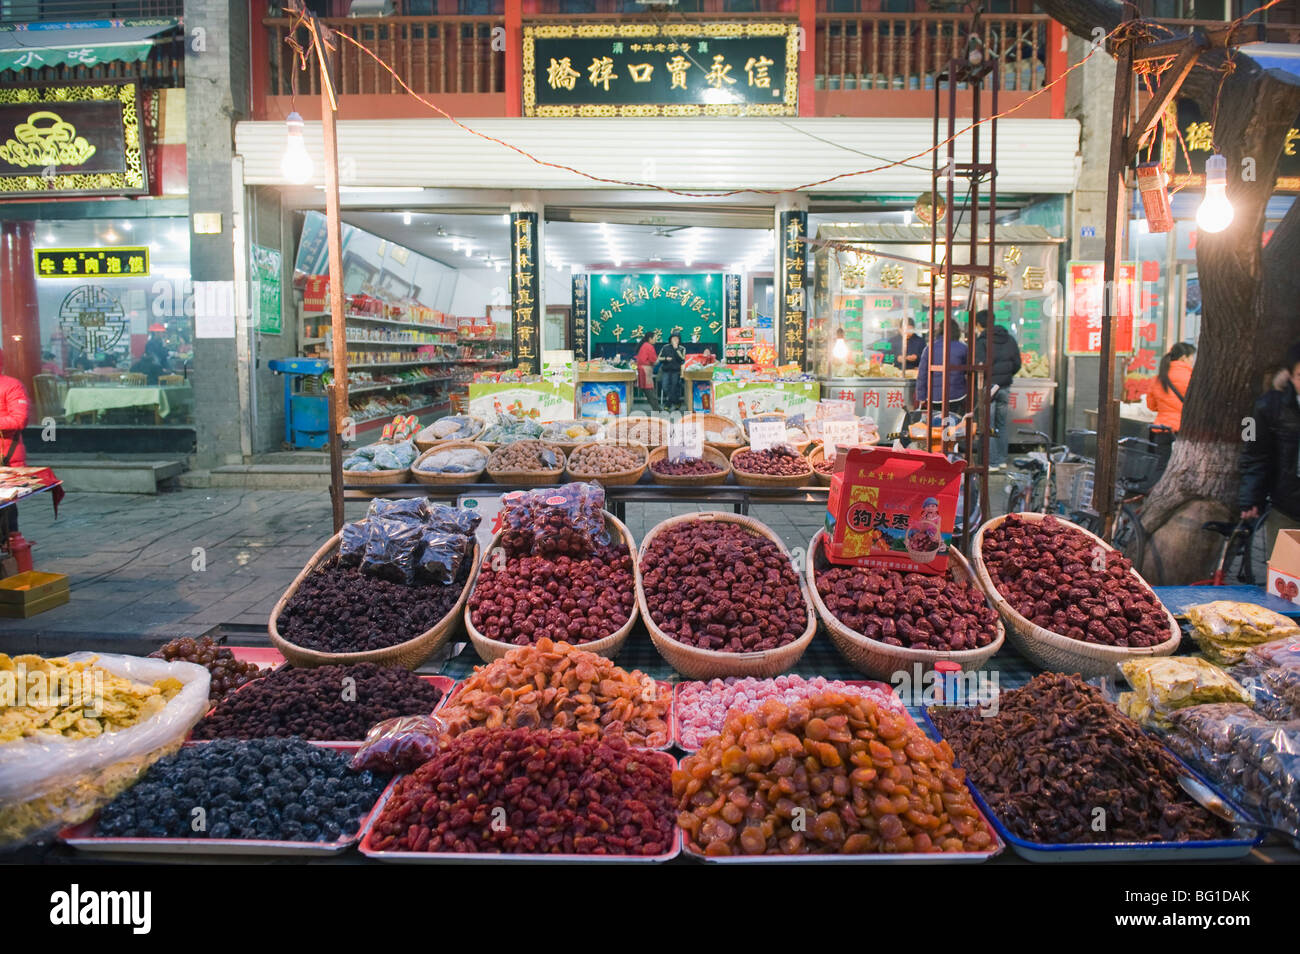 Fruit stands at a street market in the Muslim area of Xian, Shaanxi Province, China, Asia Stock Photo